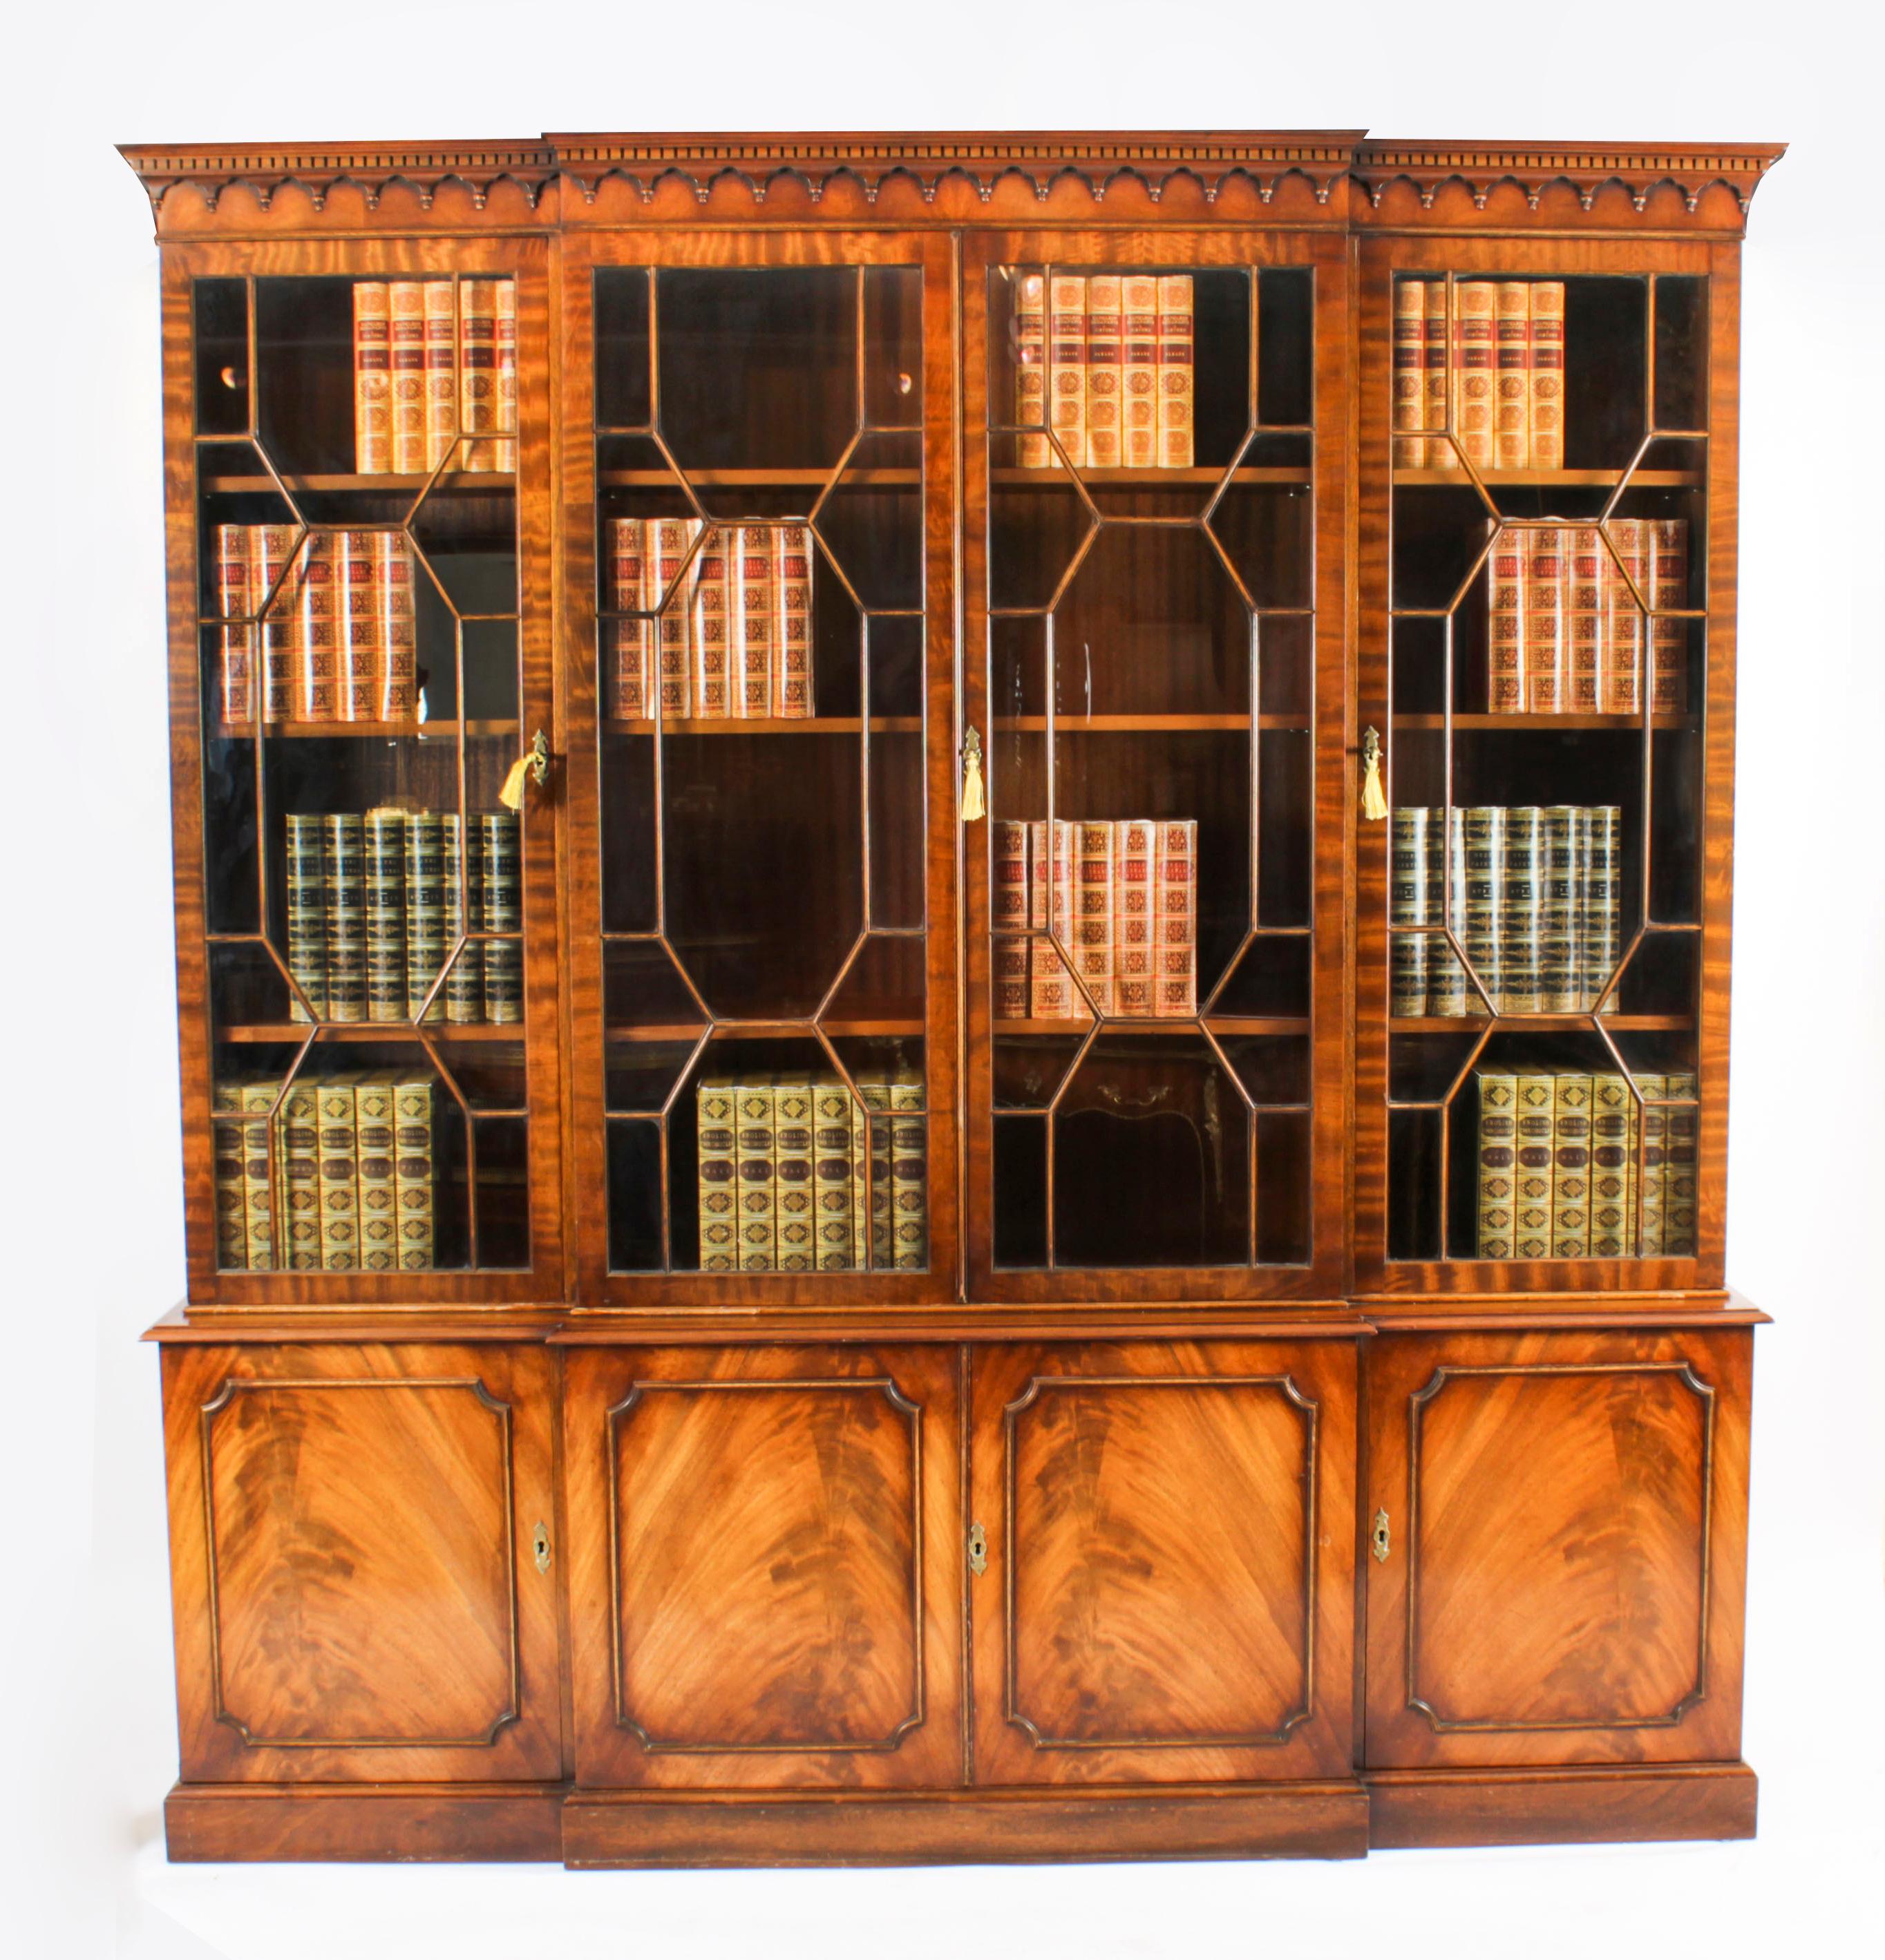 A delightful Vintage flame mahogany Georgian Revival library breakfront bookcase, dating from the mid 20th Century.

The top features a moulded cornice with a dental and arcaded frieze. The four astragal glazed doors open to reveal three